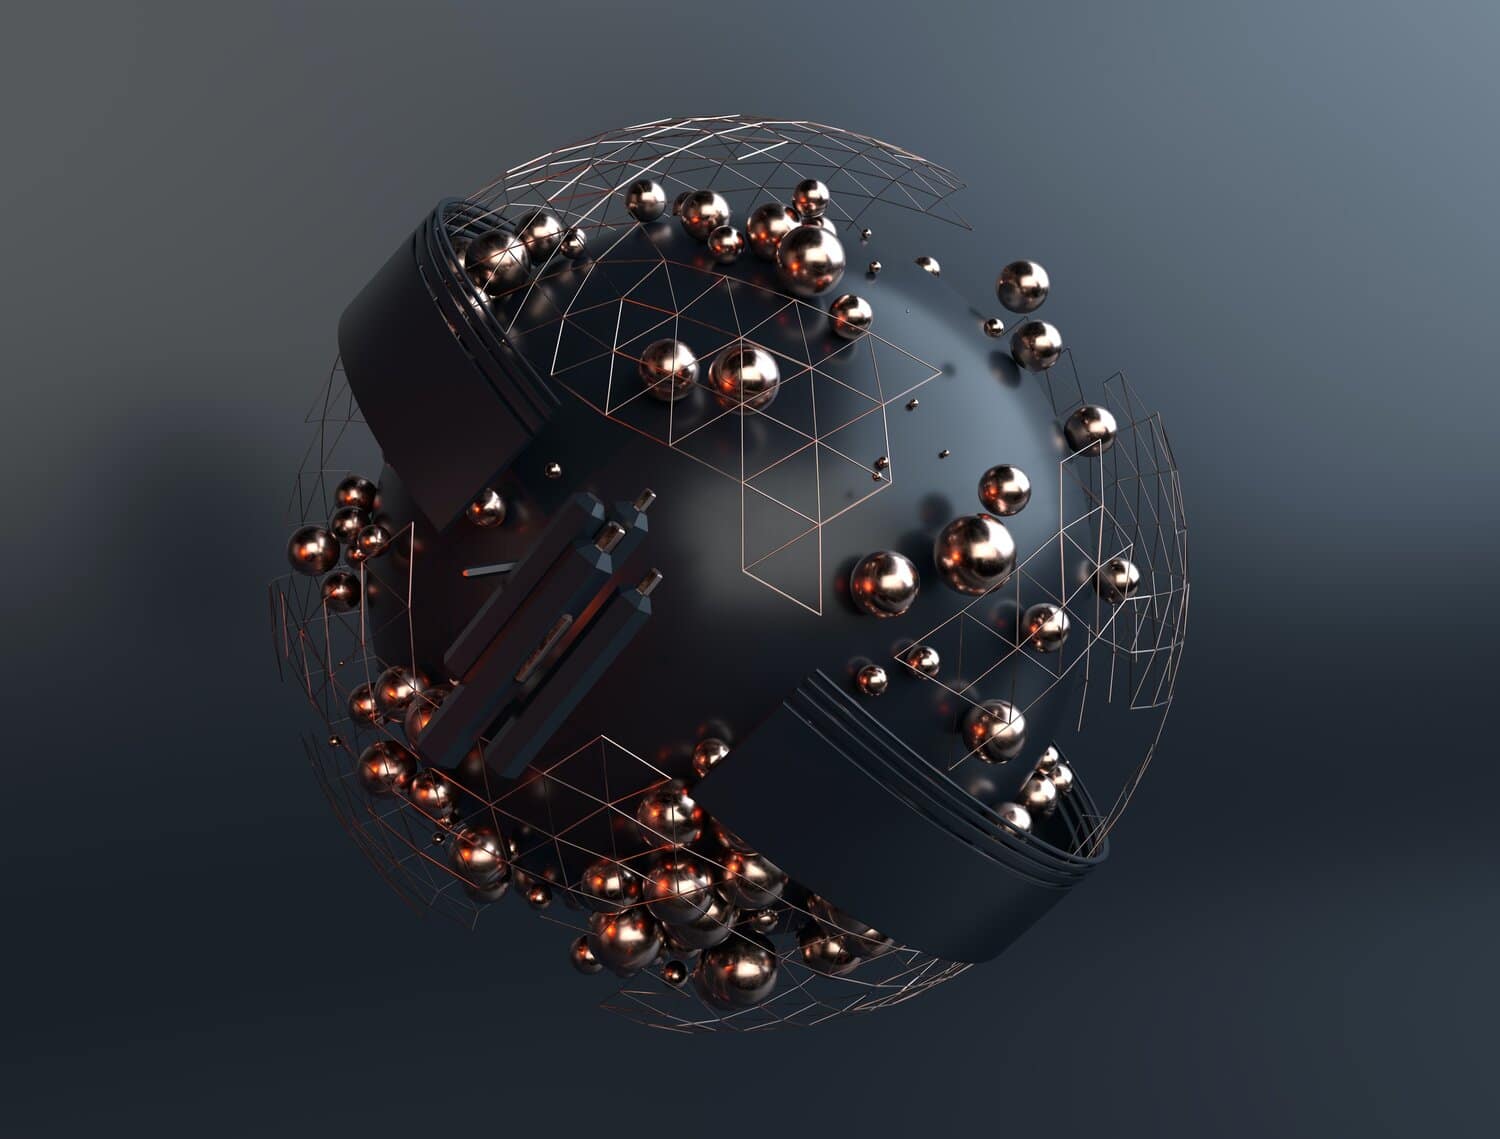 Spherical abstract structure with metallic spheres and connecting lines, suggesting network connectivity.